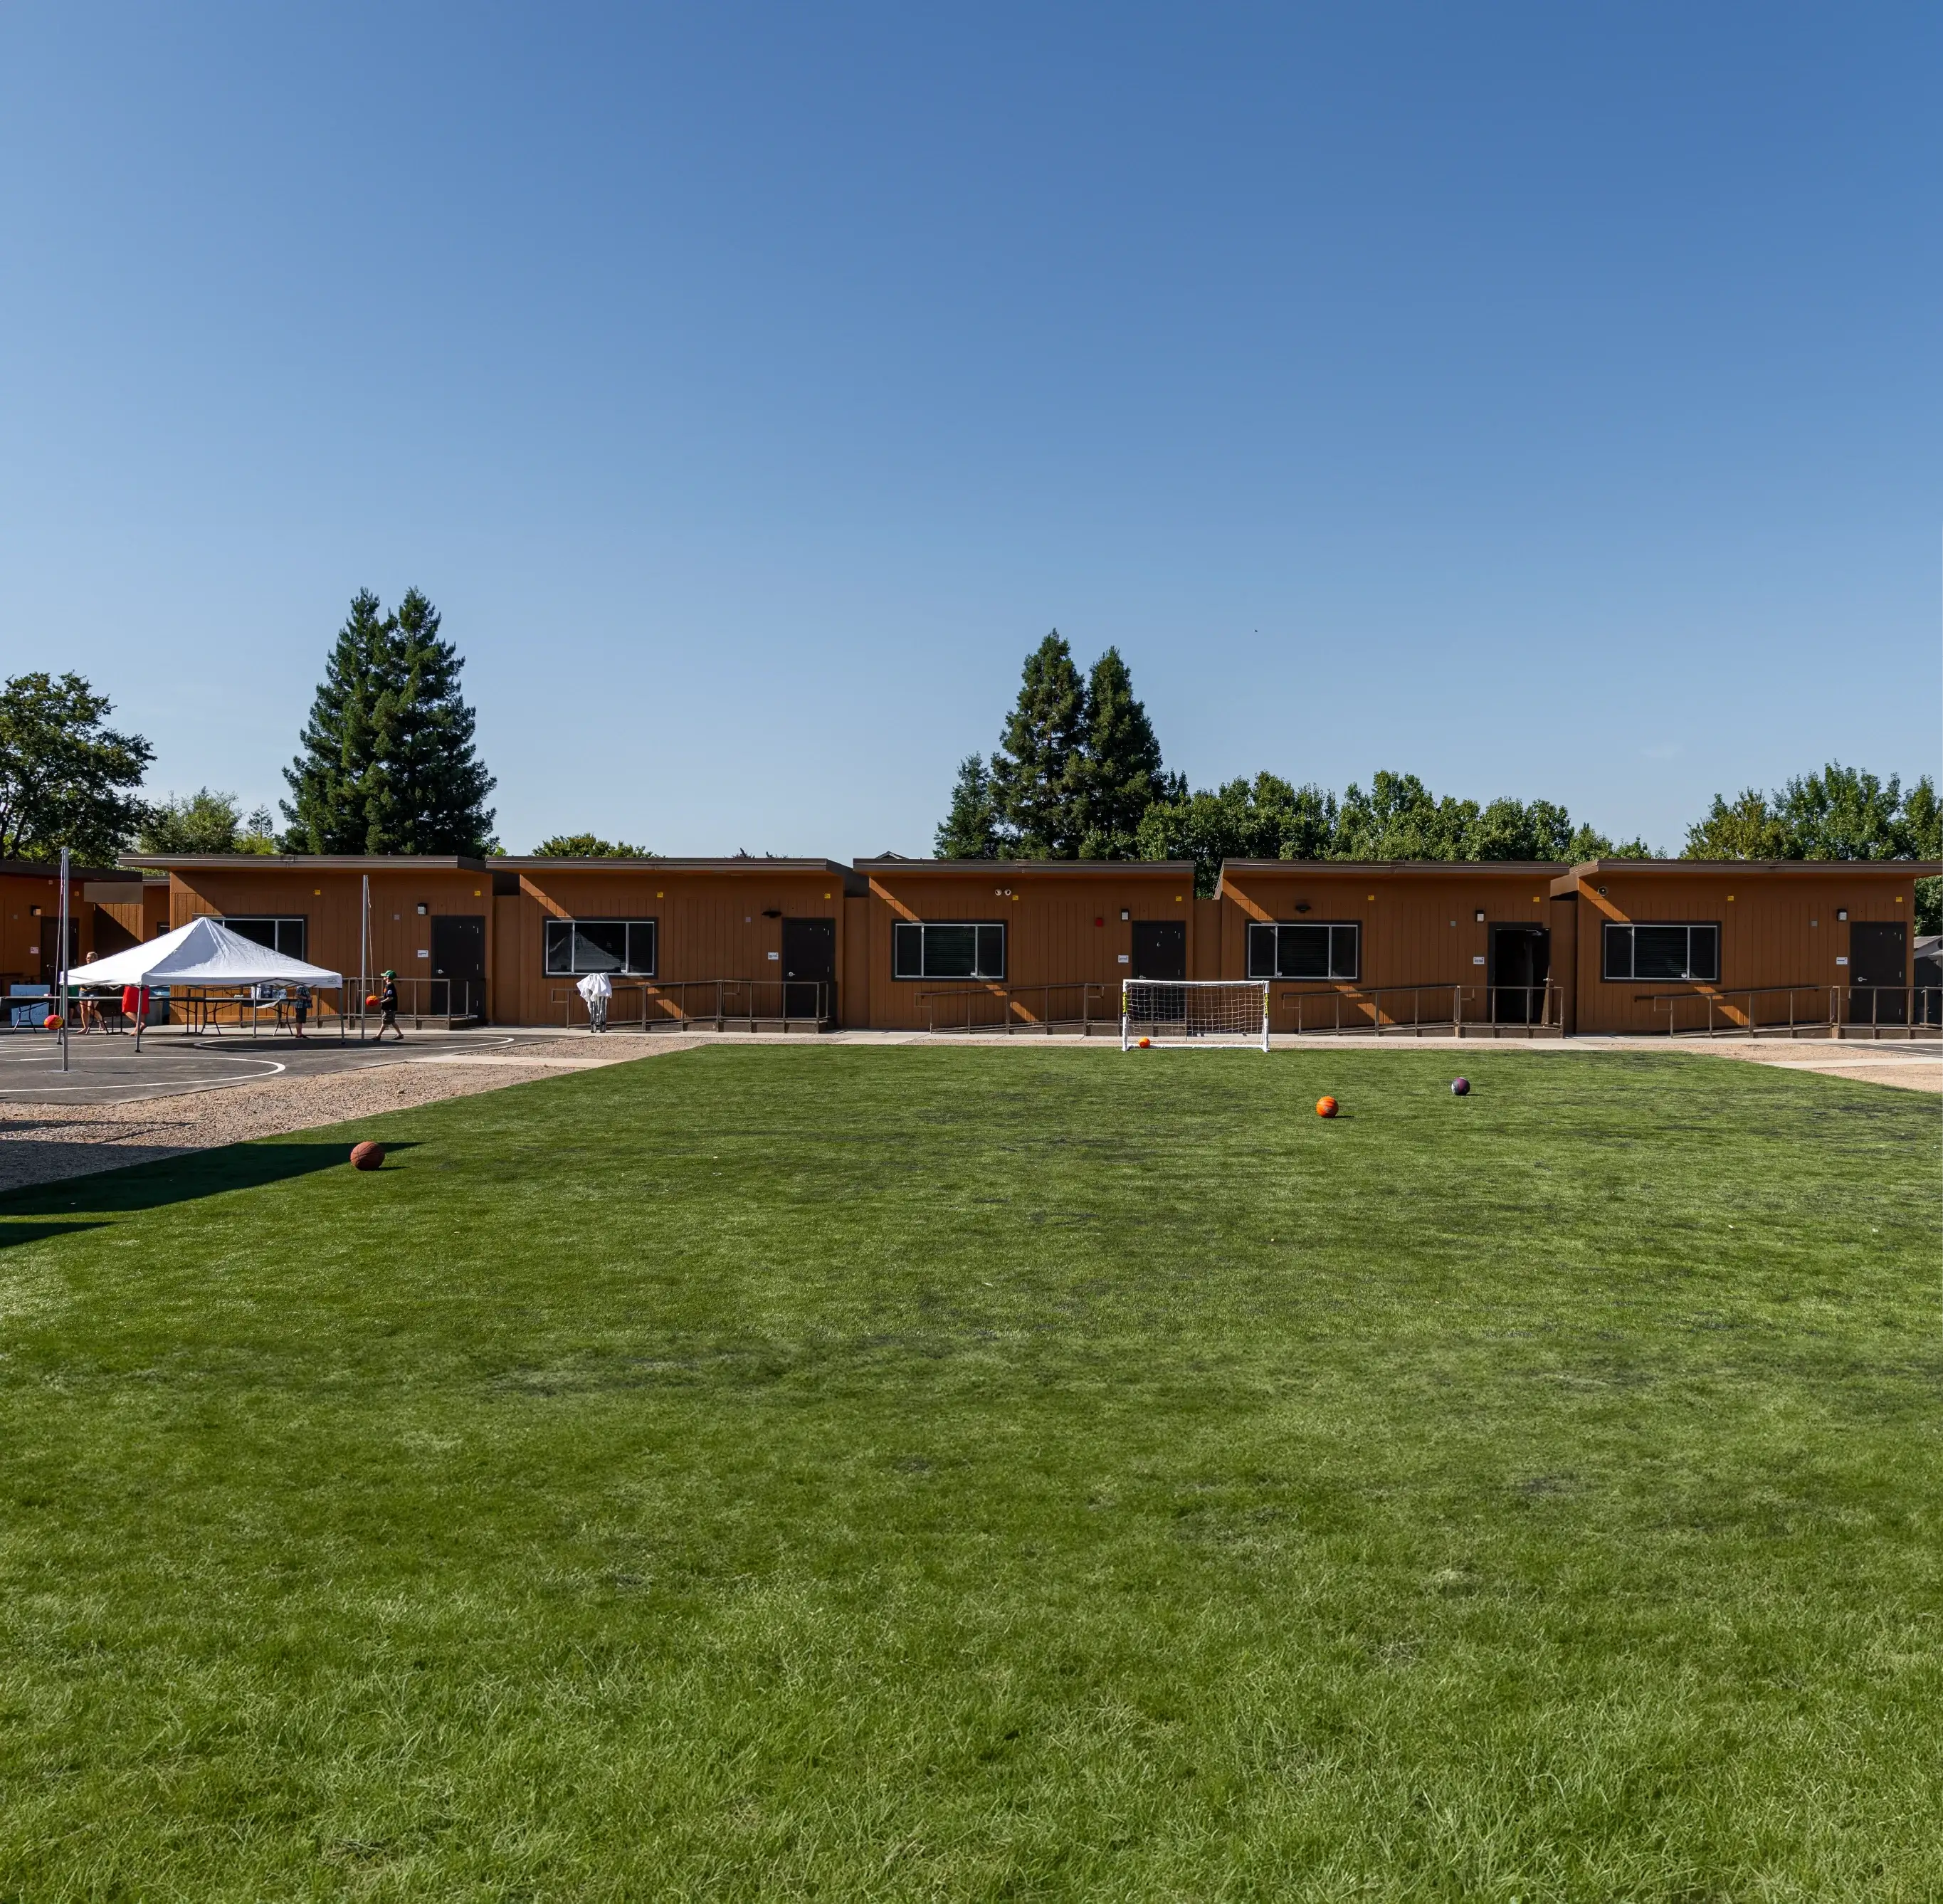 Rent, Lease or Purchase Modular Classroom Building Solutions